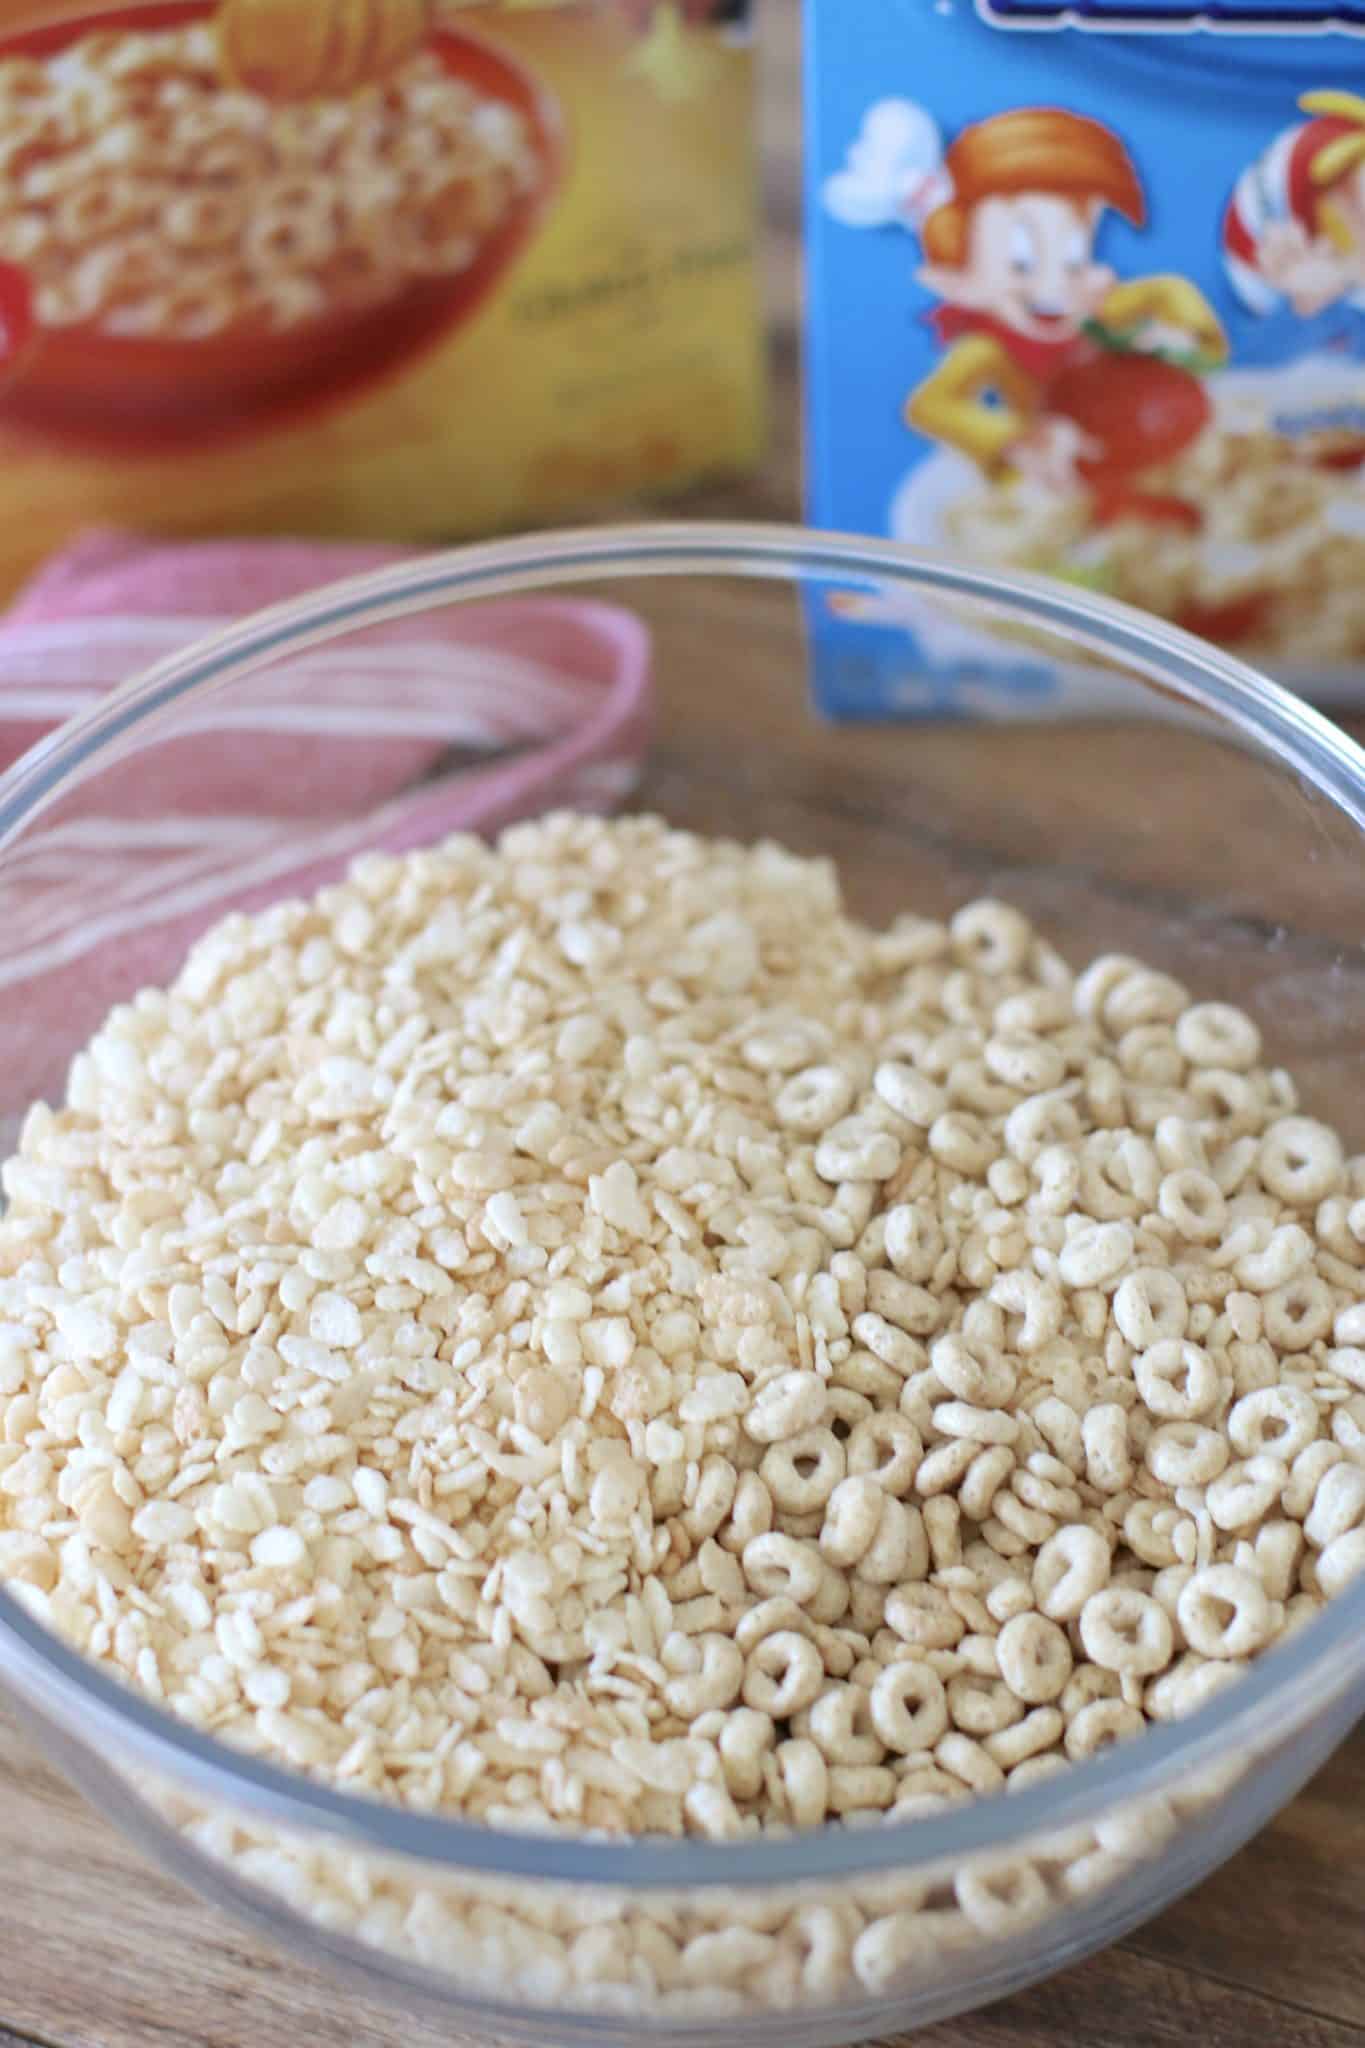 Rice Krispies and honey nut cheerios mixed together in a bowl.